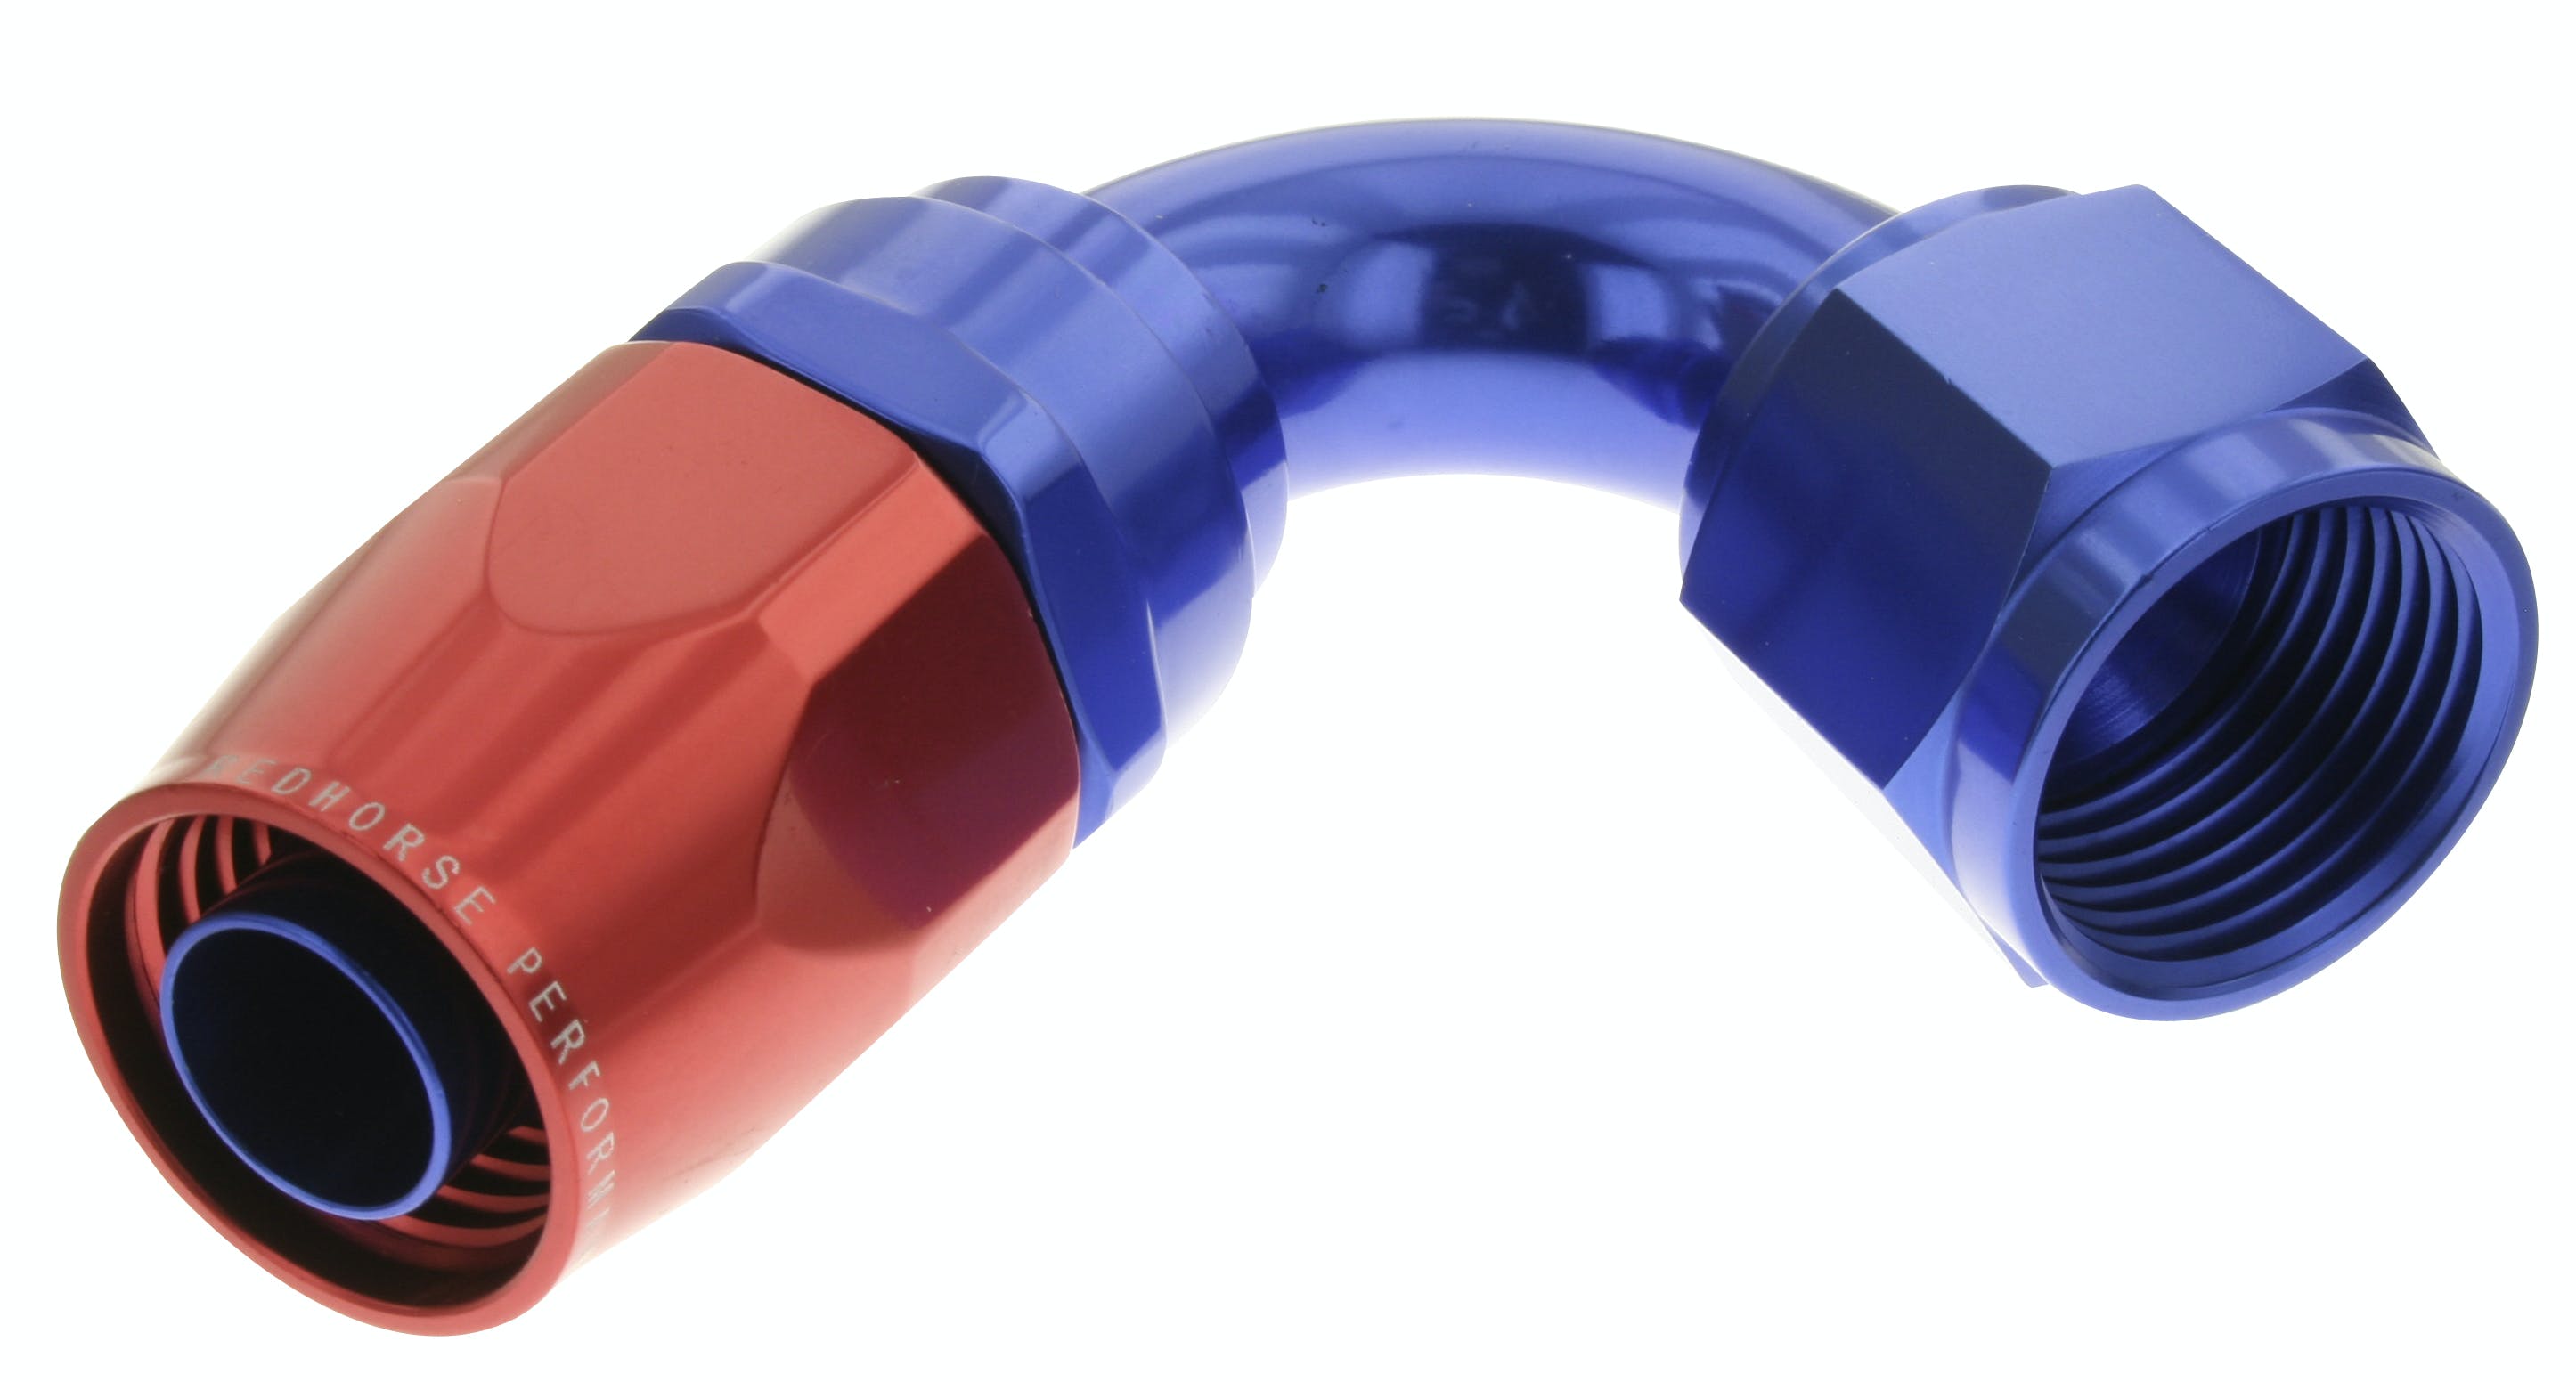 Redhorse Performance 1120-06-1 -06 120 degree Female Aluminum Hose End - red and blue